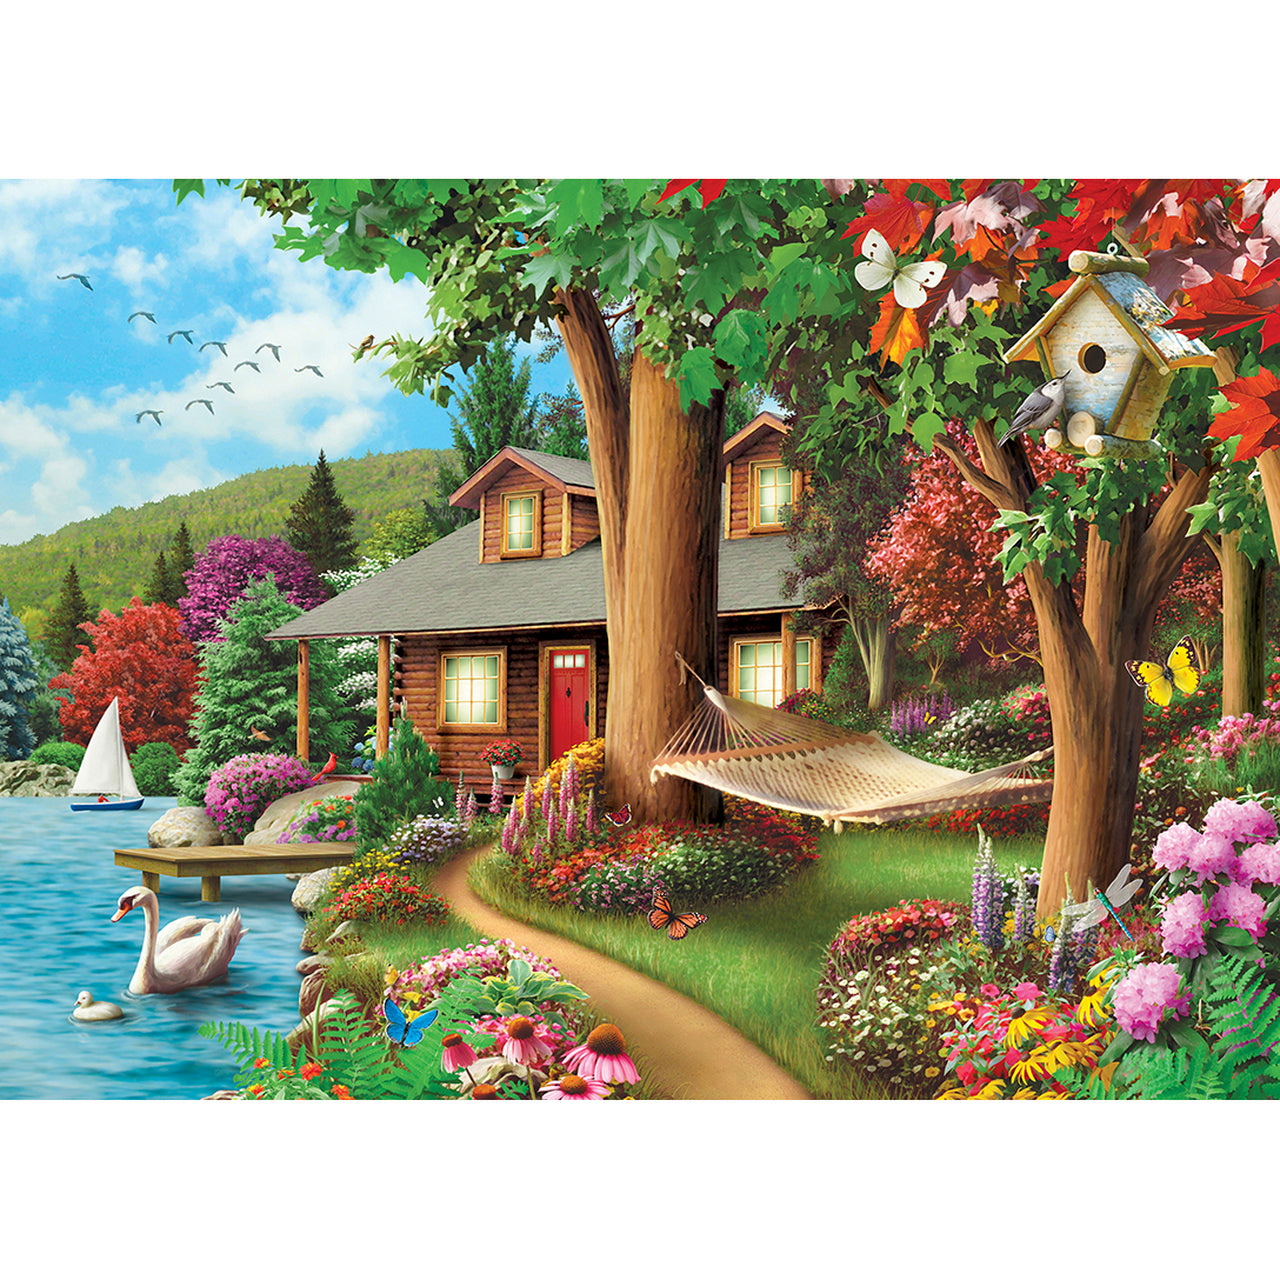 Time Away Around the Lake - 1000 Piece Jigsaw Puzzle by Masterpieces